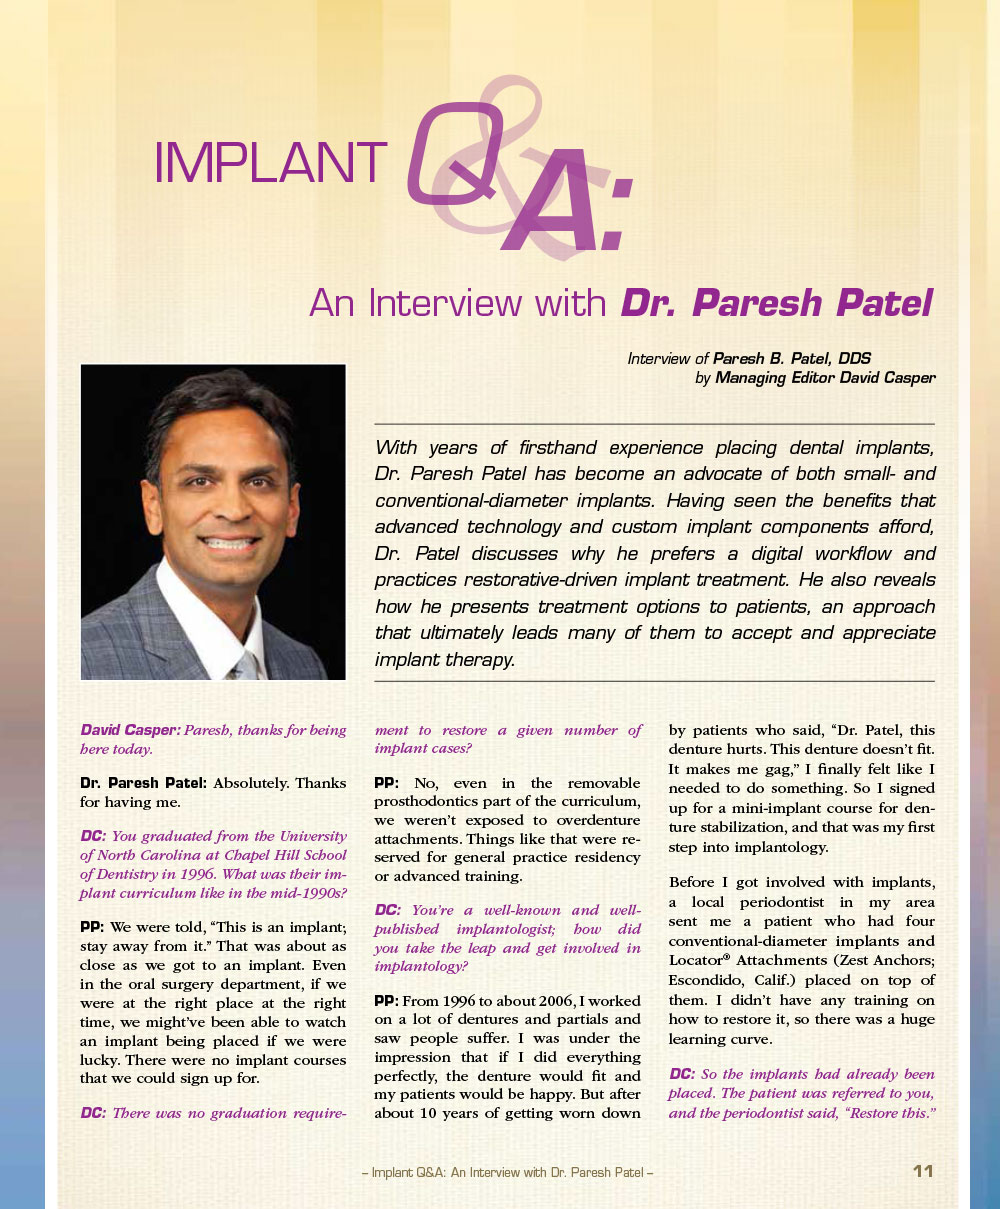 Implant Q & A: An Interview with Dr. Paresh Patel